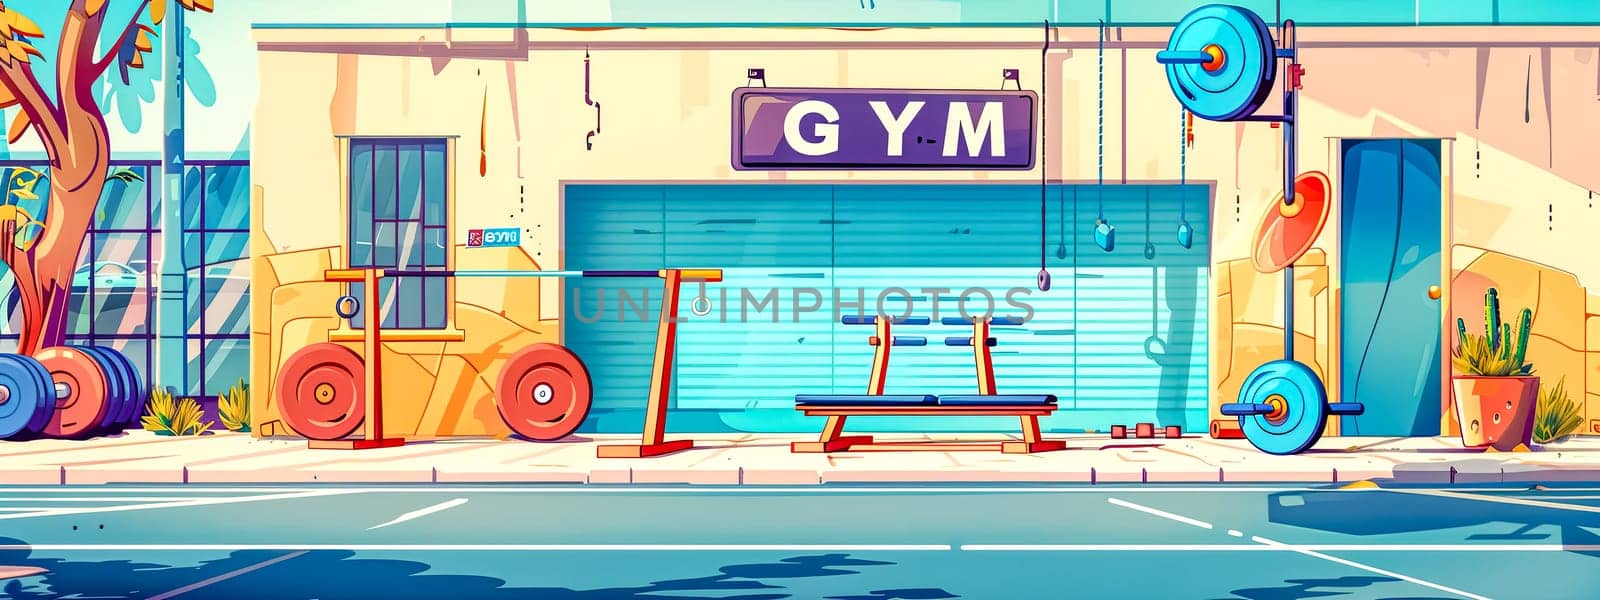 Vibrant digital illustration of a street-facing gym front, complete with weightlifting gear